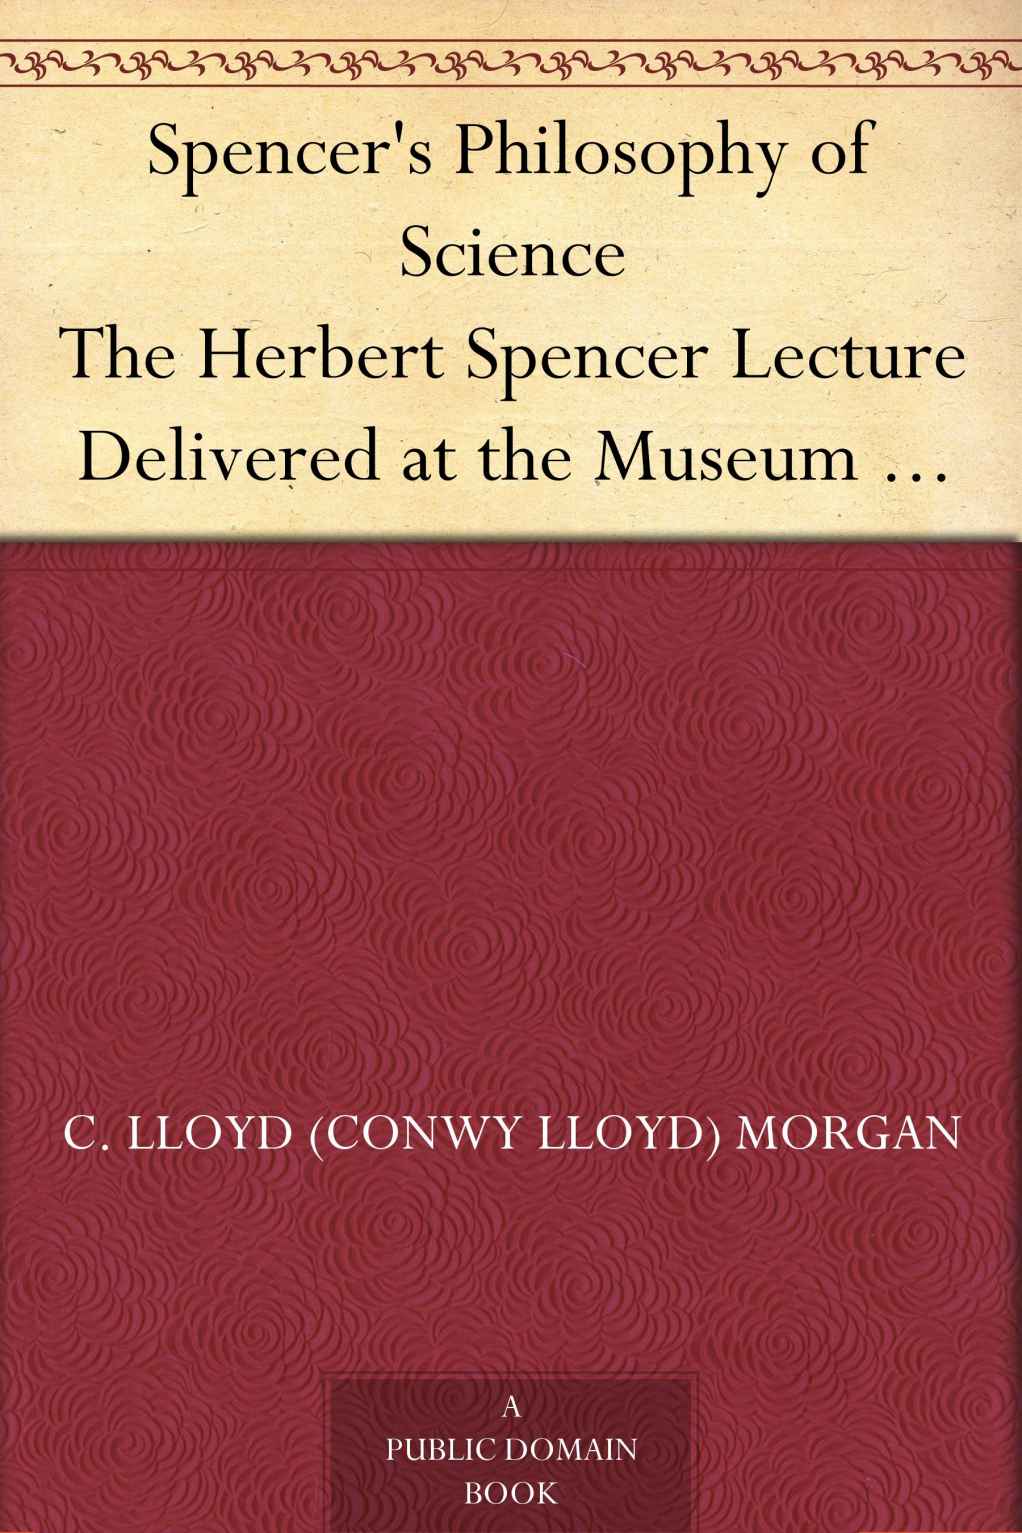 Spencer's Philosophy of Science The Herbert Spencer Lecture Delivered at the Museum 7 November, 1913